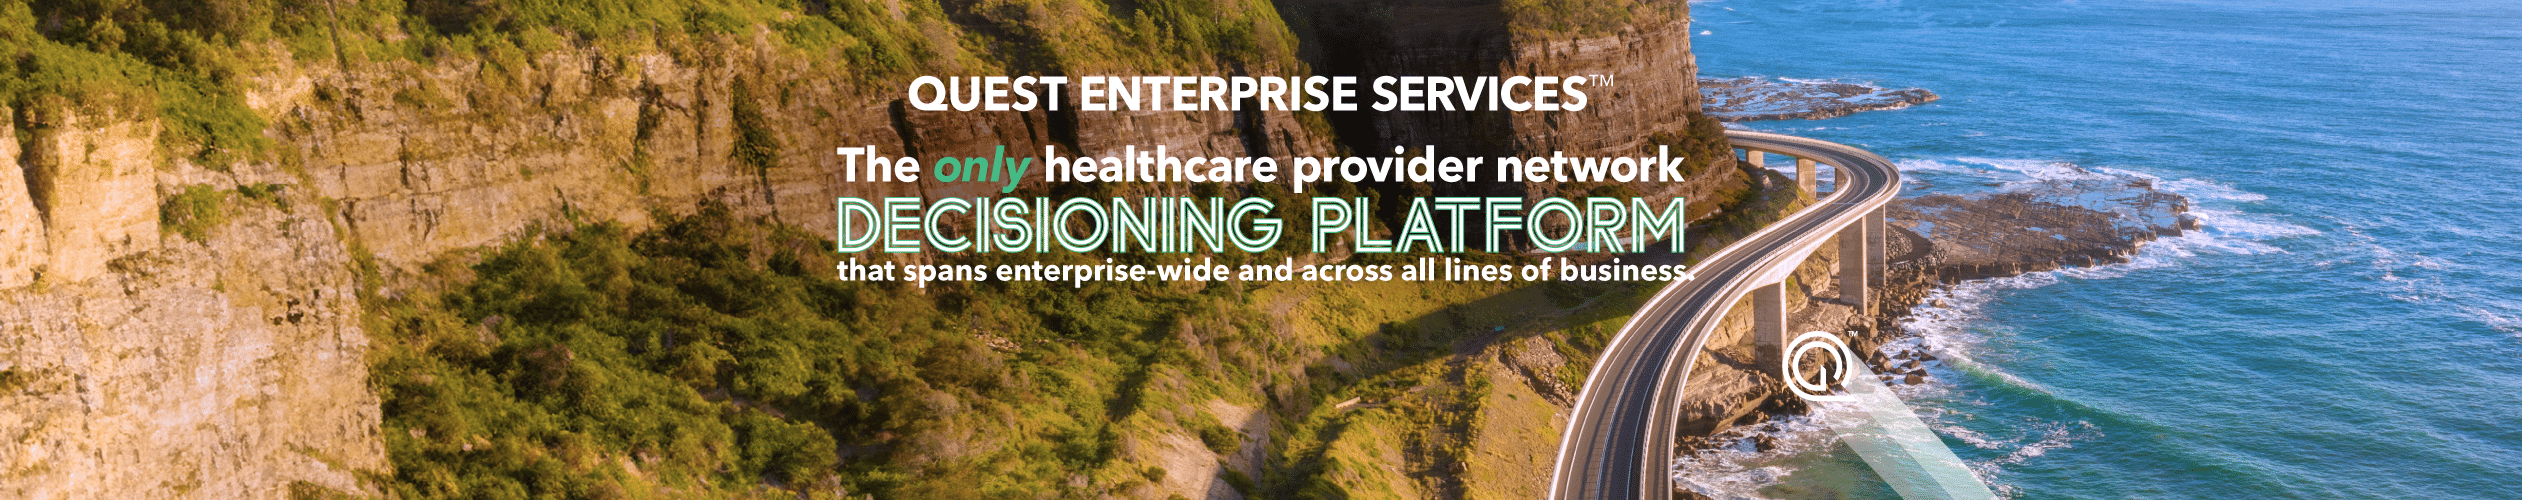 Quest Enterprise Services The only healthcare provider network decisioning platform that spans enterprise-wide and across all lines of business. Learn More 